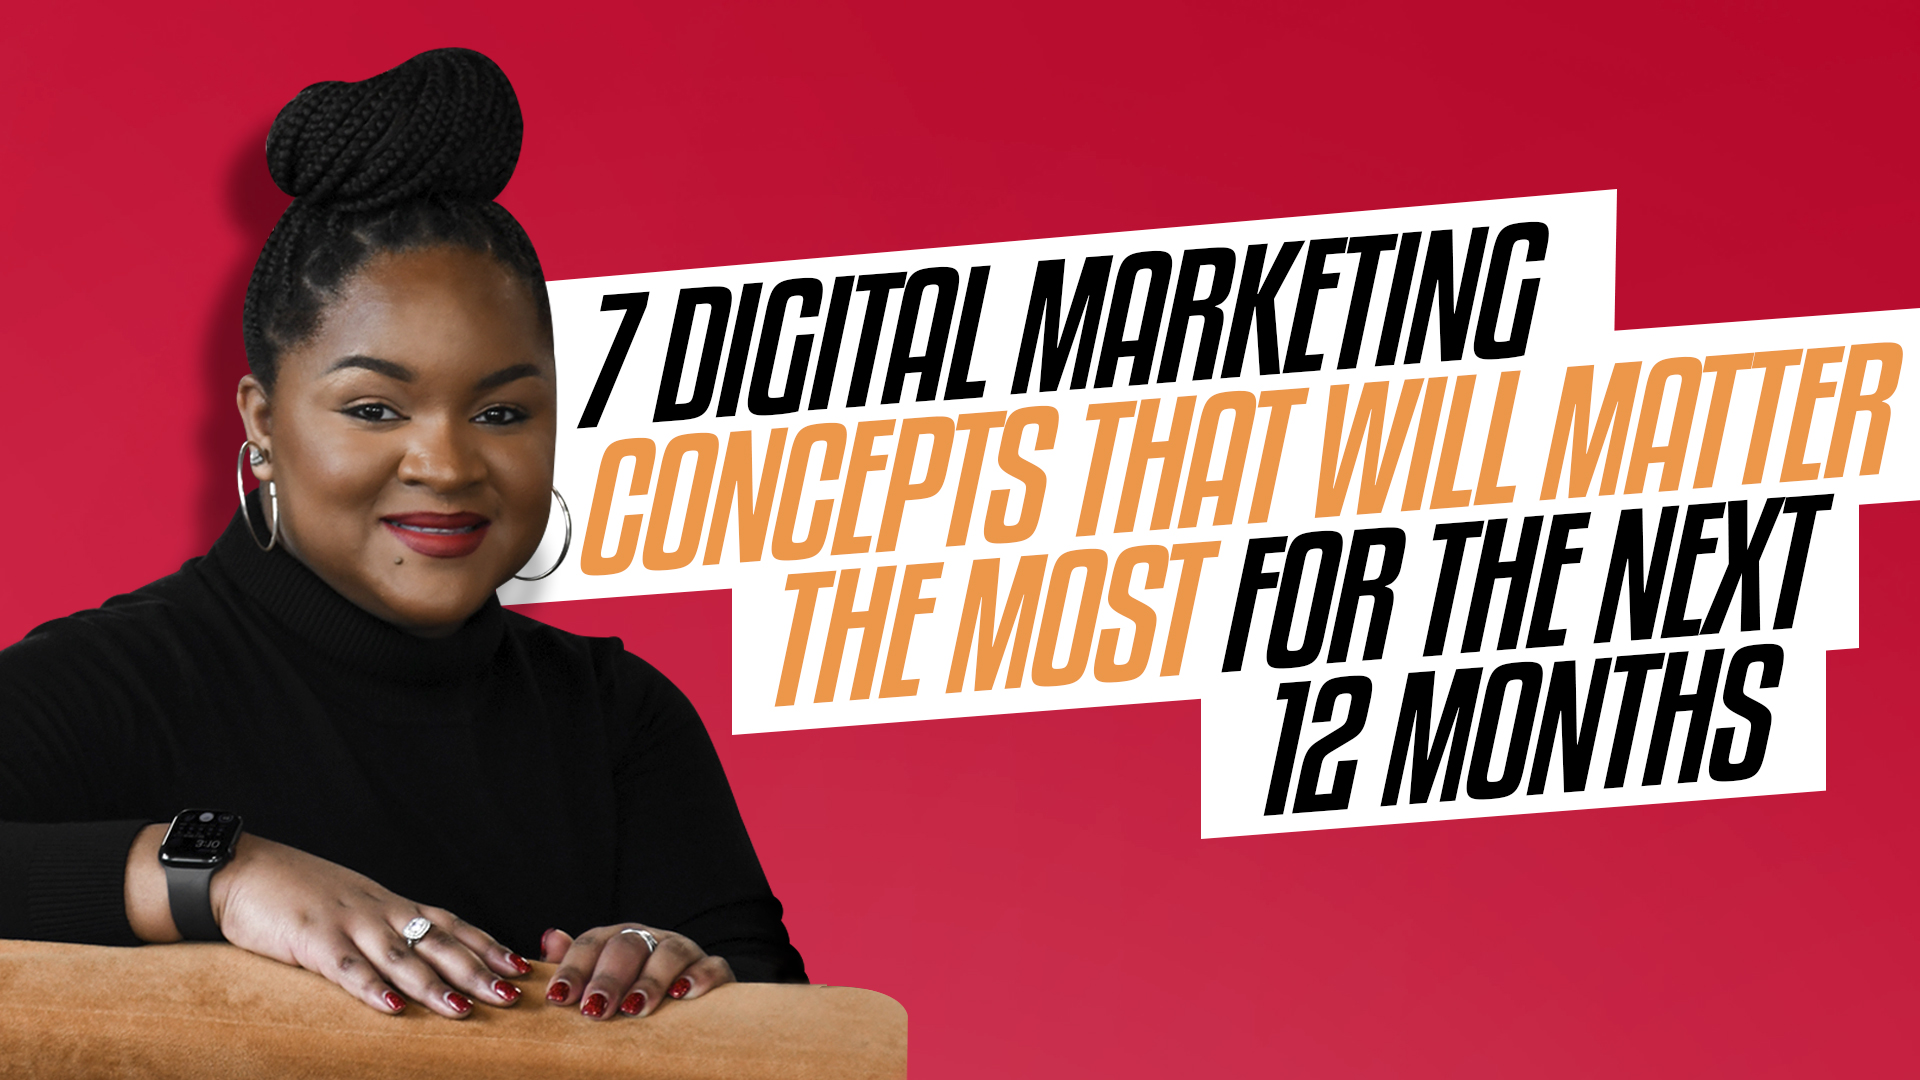 Episode #4: 7 Digital Marketing Concepts that Will Matter the Most for the Next 12 Months